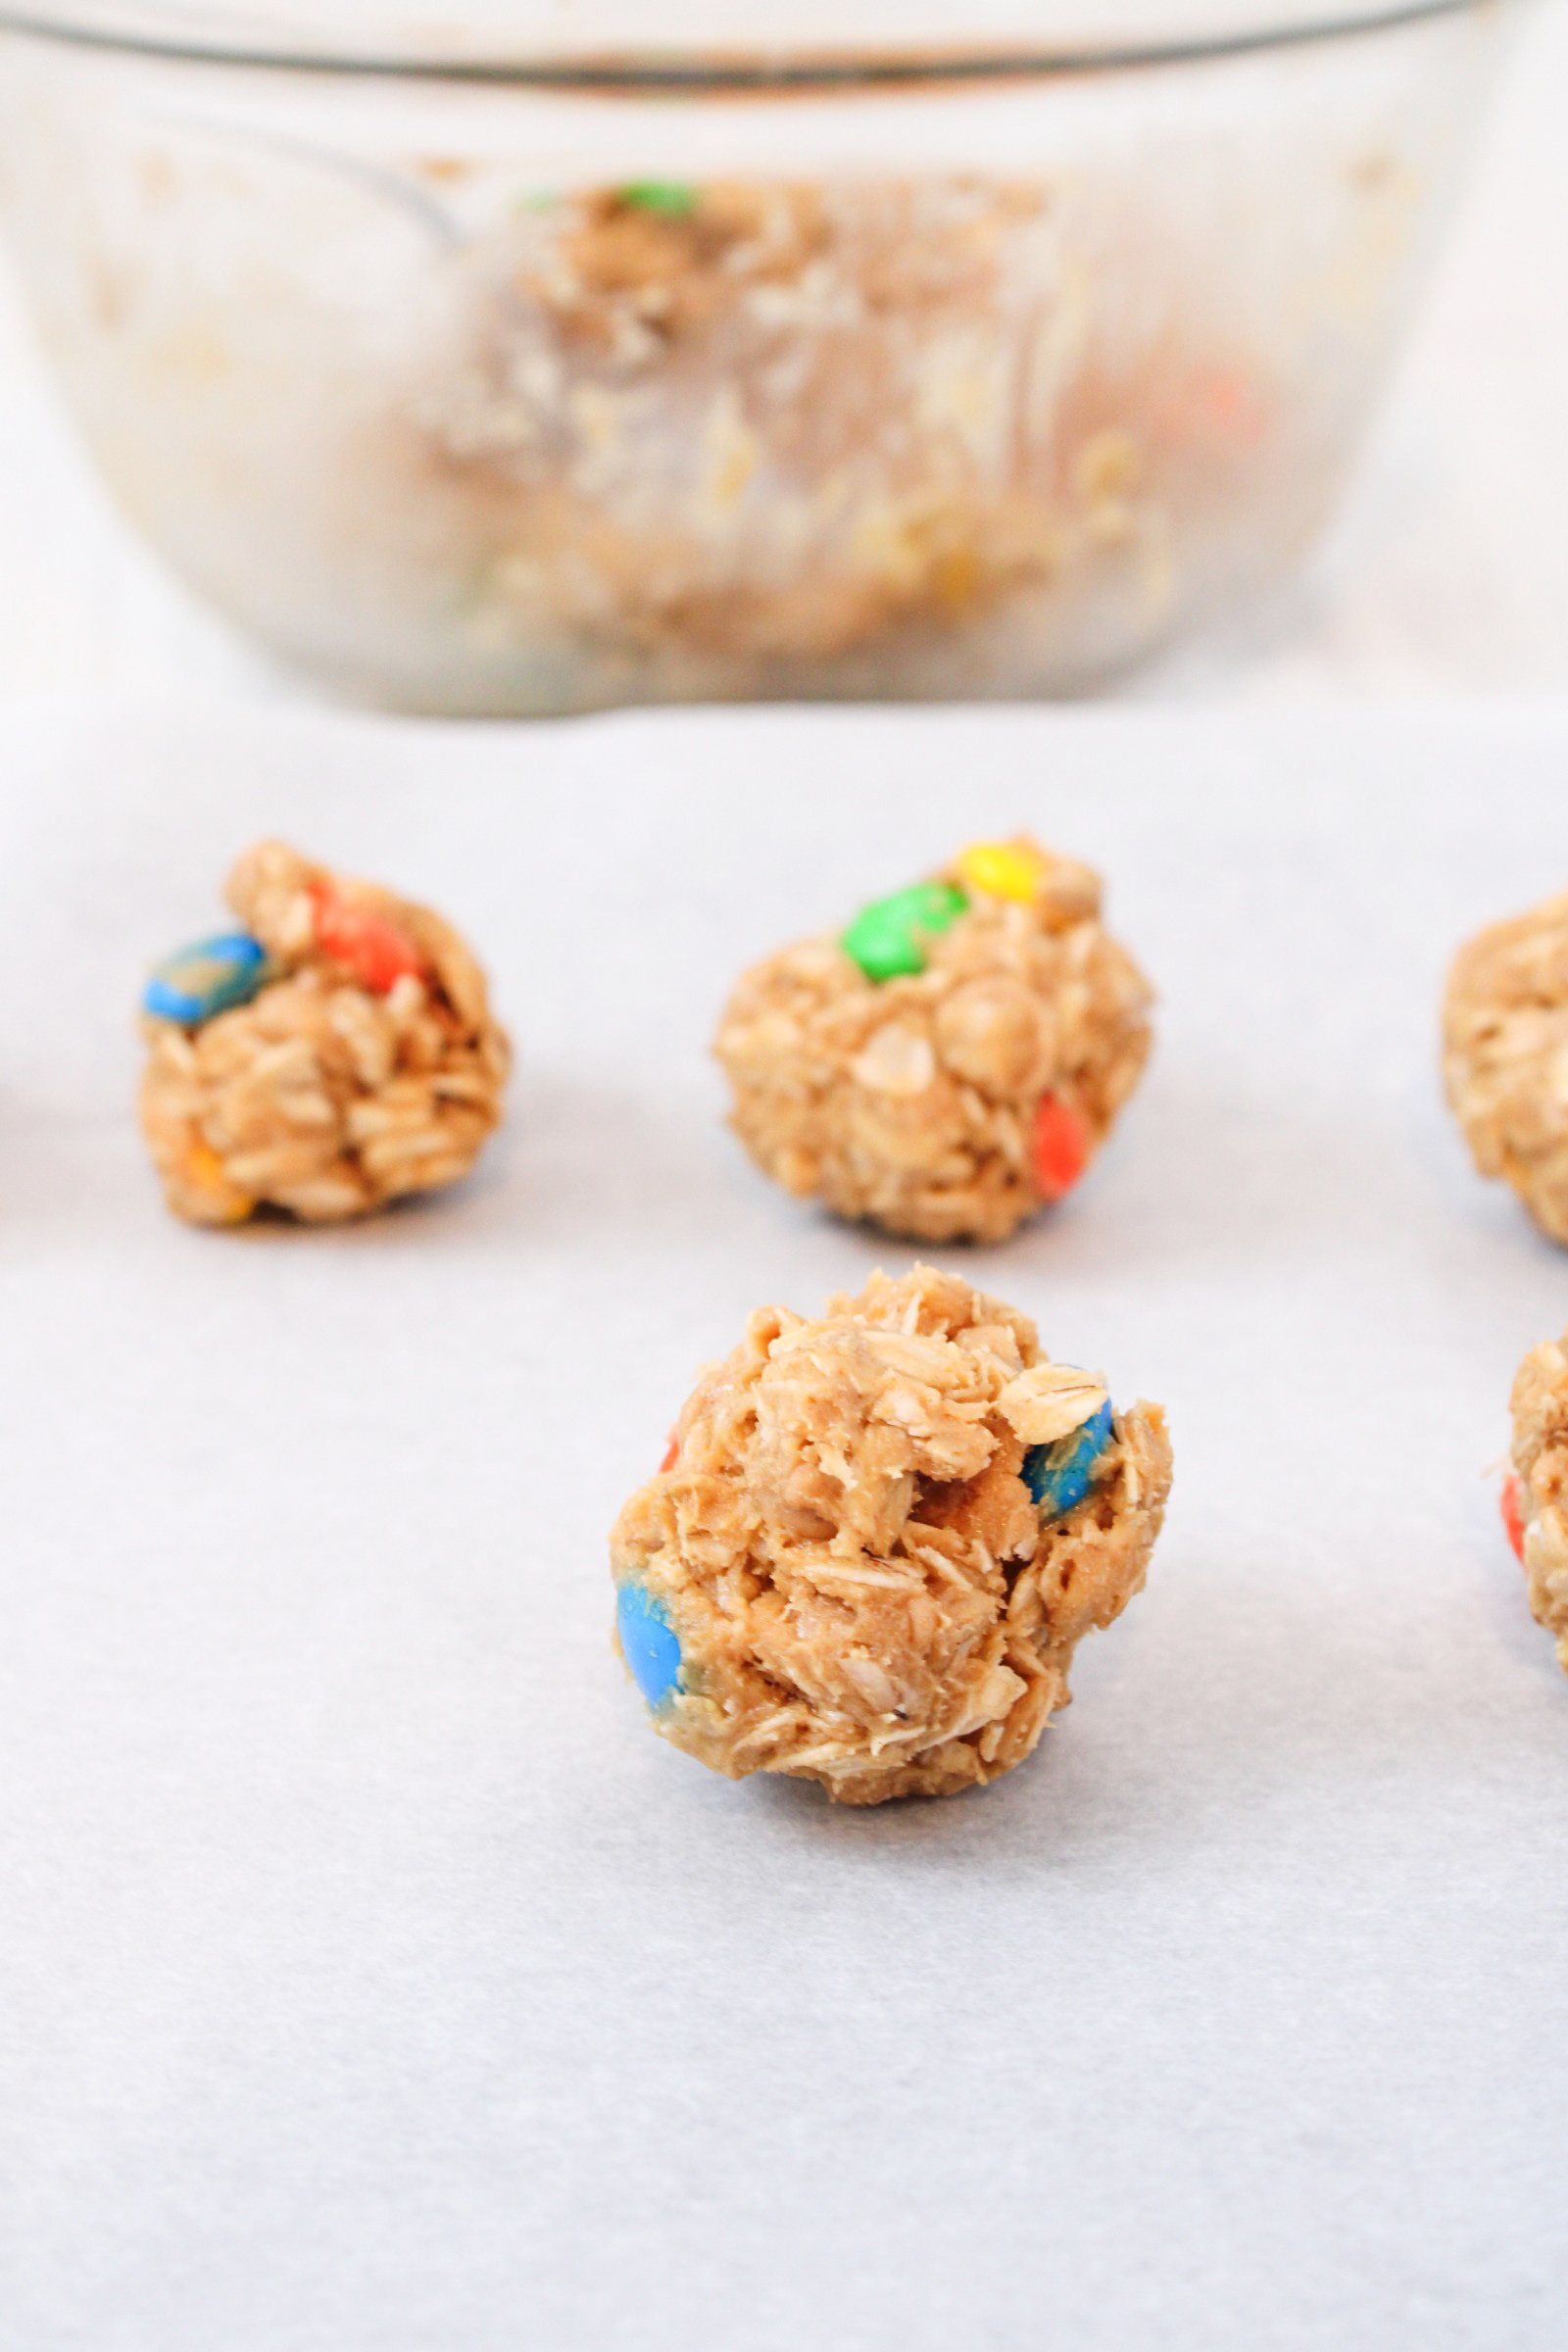 Forming the monster cookie balls and placing them on parchment paper.